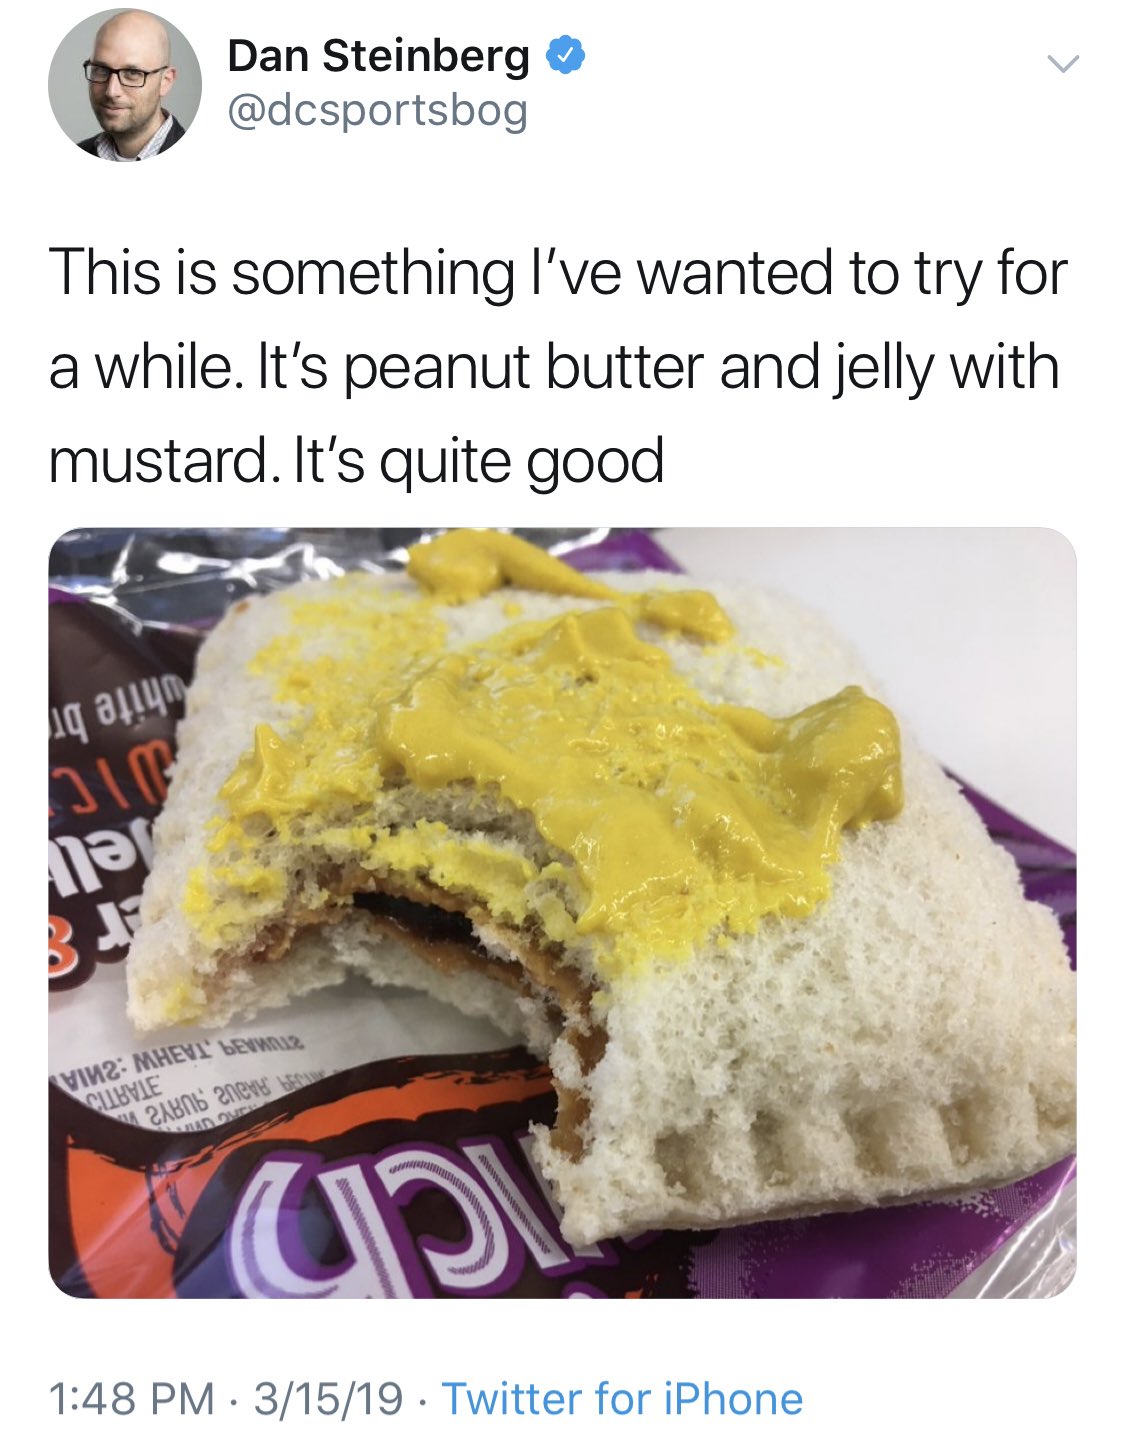 recipe - Dan Steinberg This is something I've wanted to try for a while. It's peanut butter and jelly with mustard. It's quite good 1qafiyn Sie 184 V142 Mhevi Dev Cubvie Zabnd neve bo Adom u 31519 Twitter for iPhone